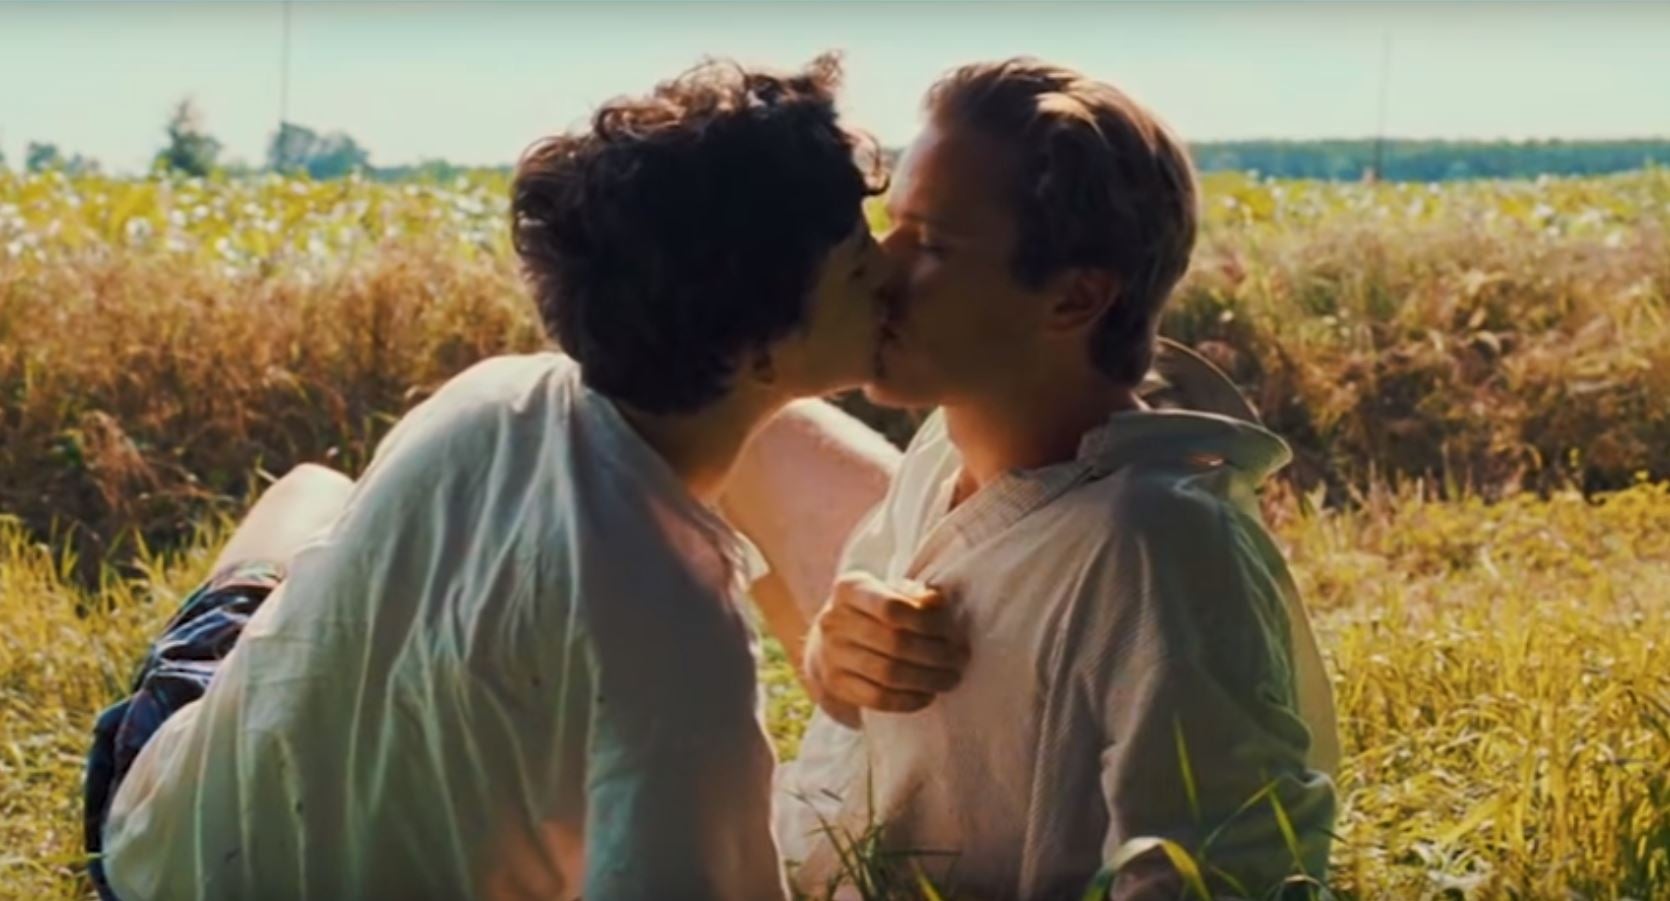 ‘Call Me By Your Name’ has been hugely successful – but will there be a sequel?